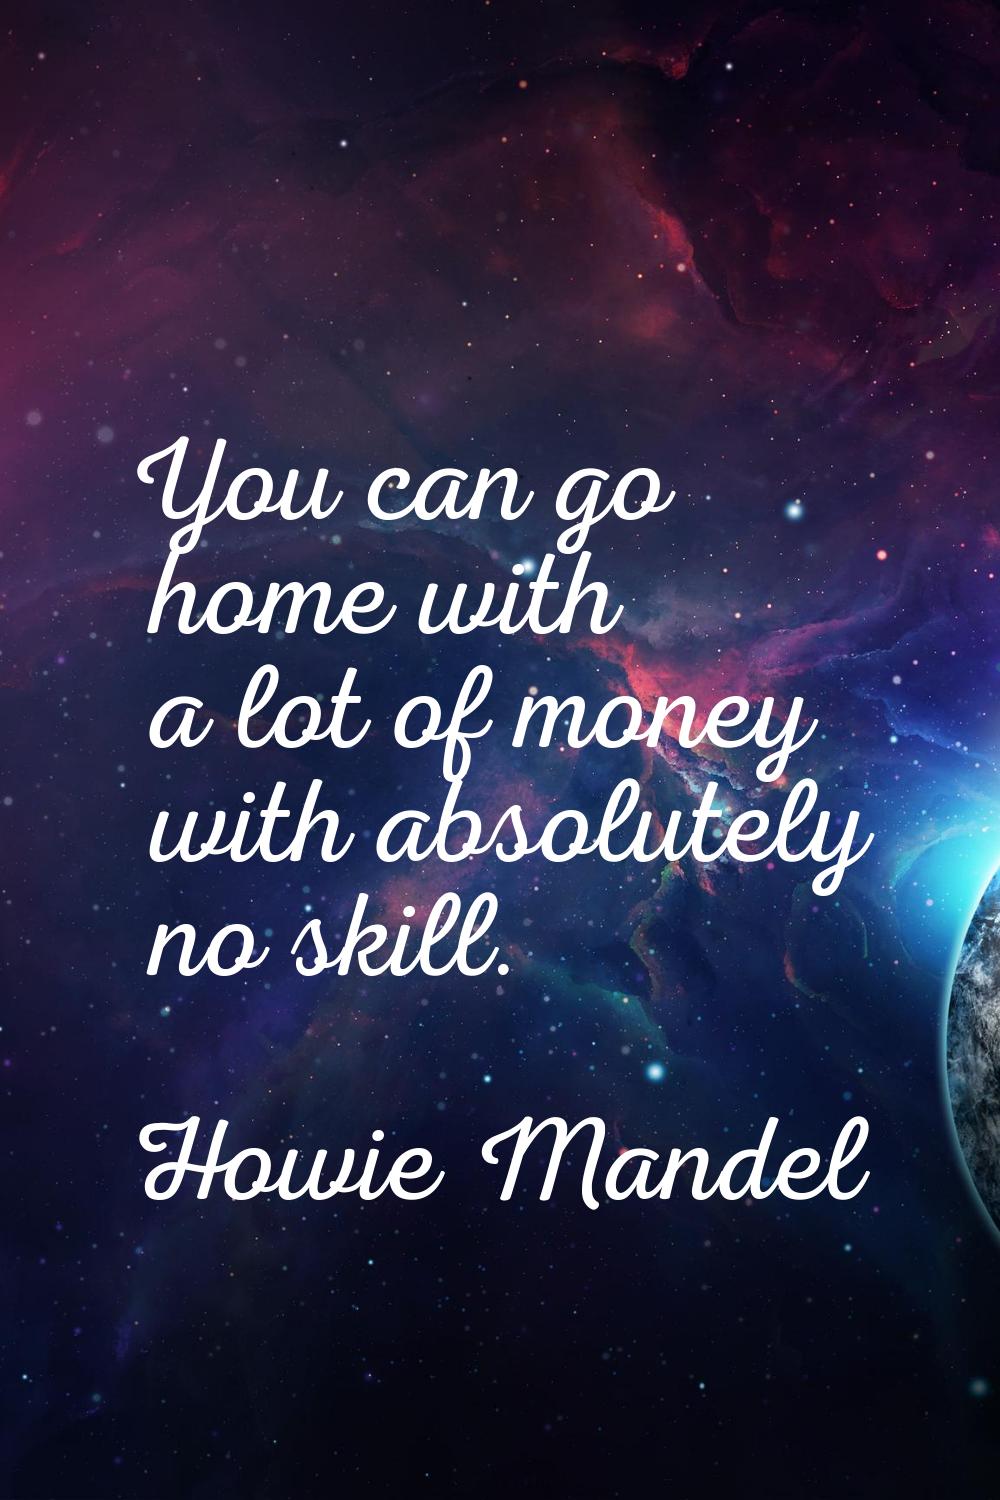 You can go home with a lot of money with absolutely no skill.